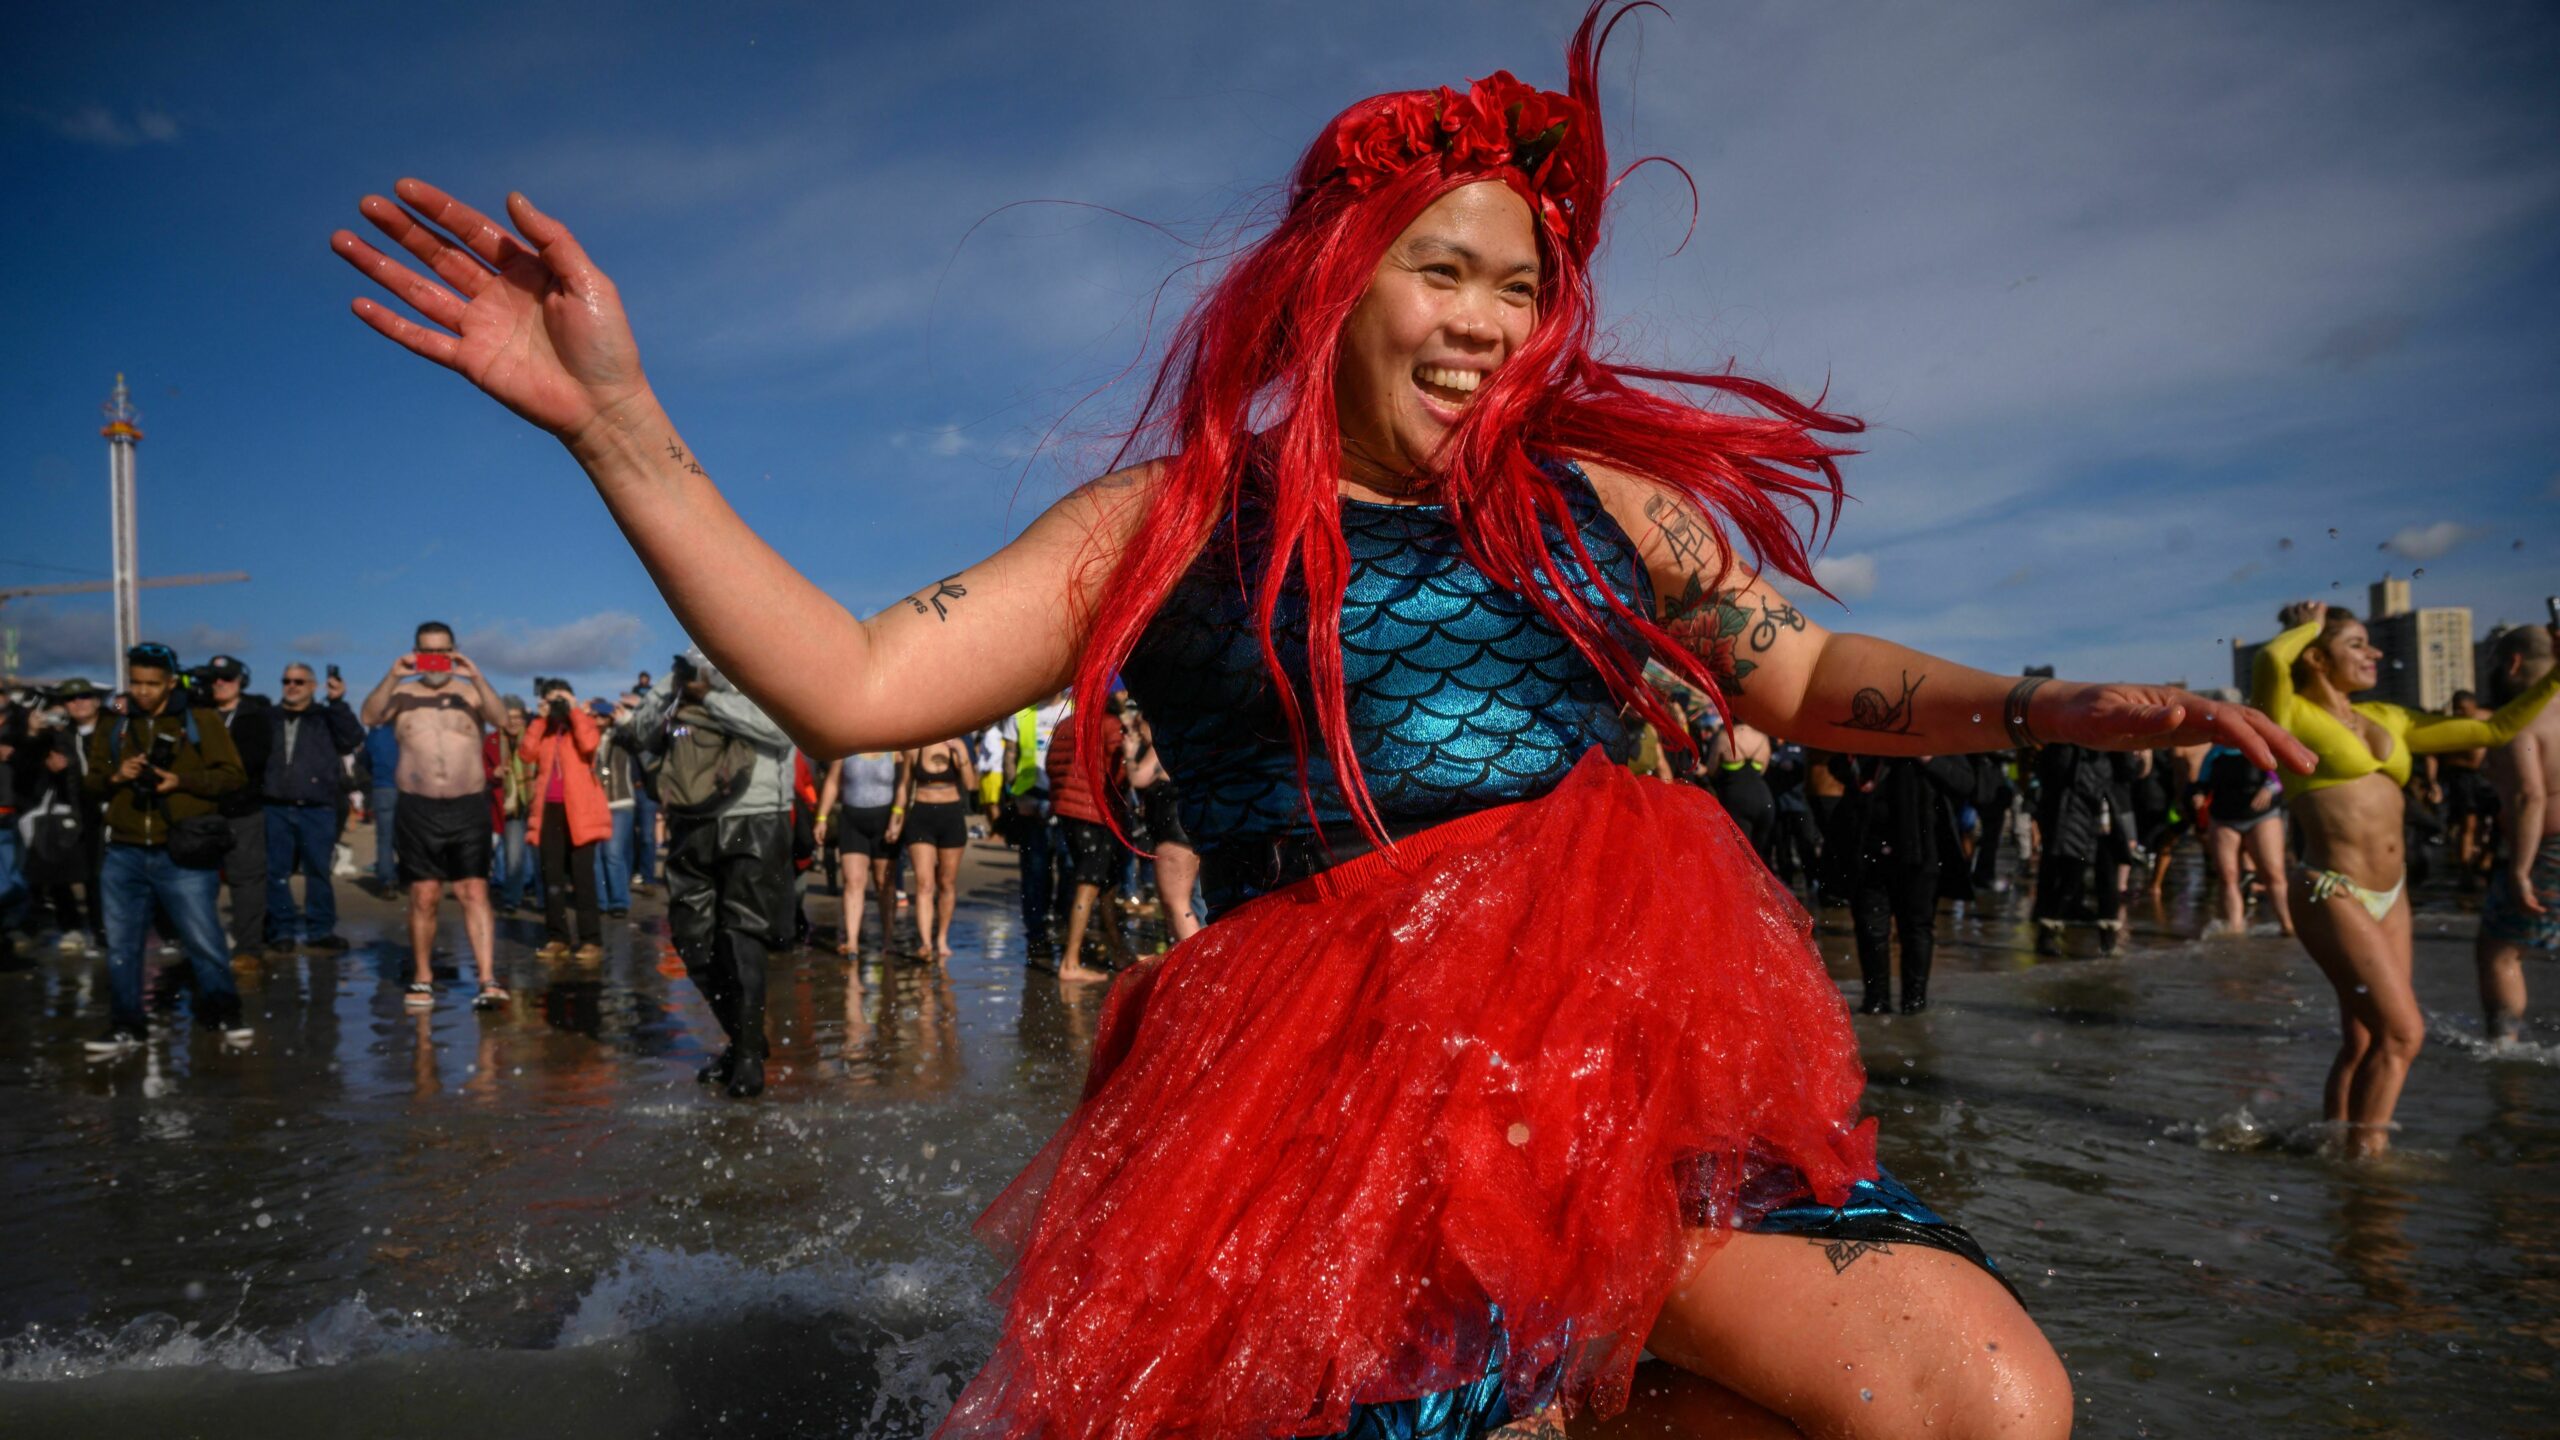 Want a polar bear plunge on New Year’s Day? Here’s a deep dive on cold water dips